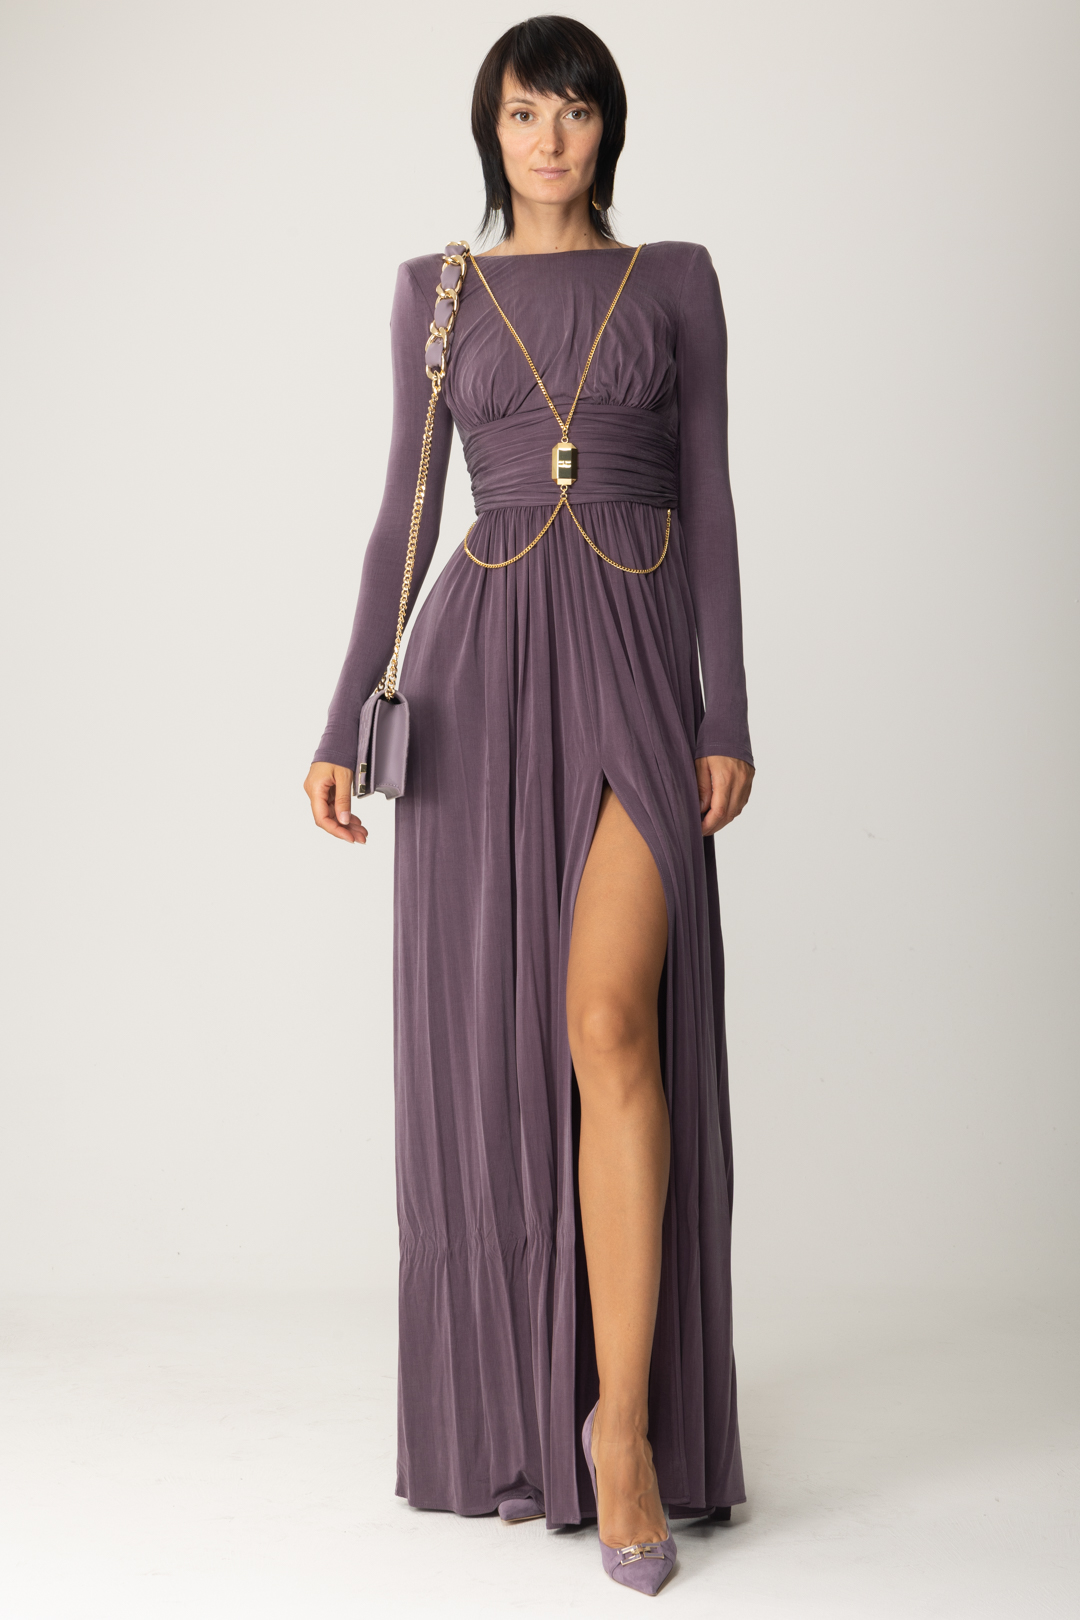 Preview: Elisabetta Franchi Red carpet dress with jewel PRUGNA